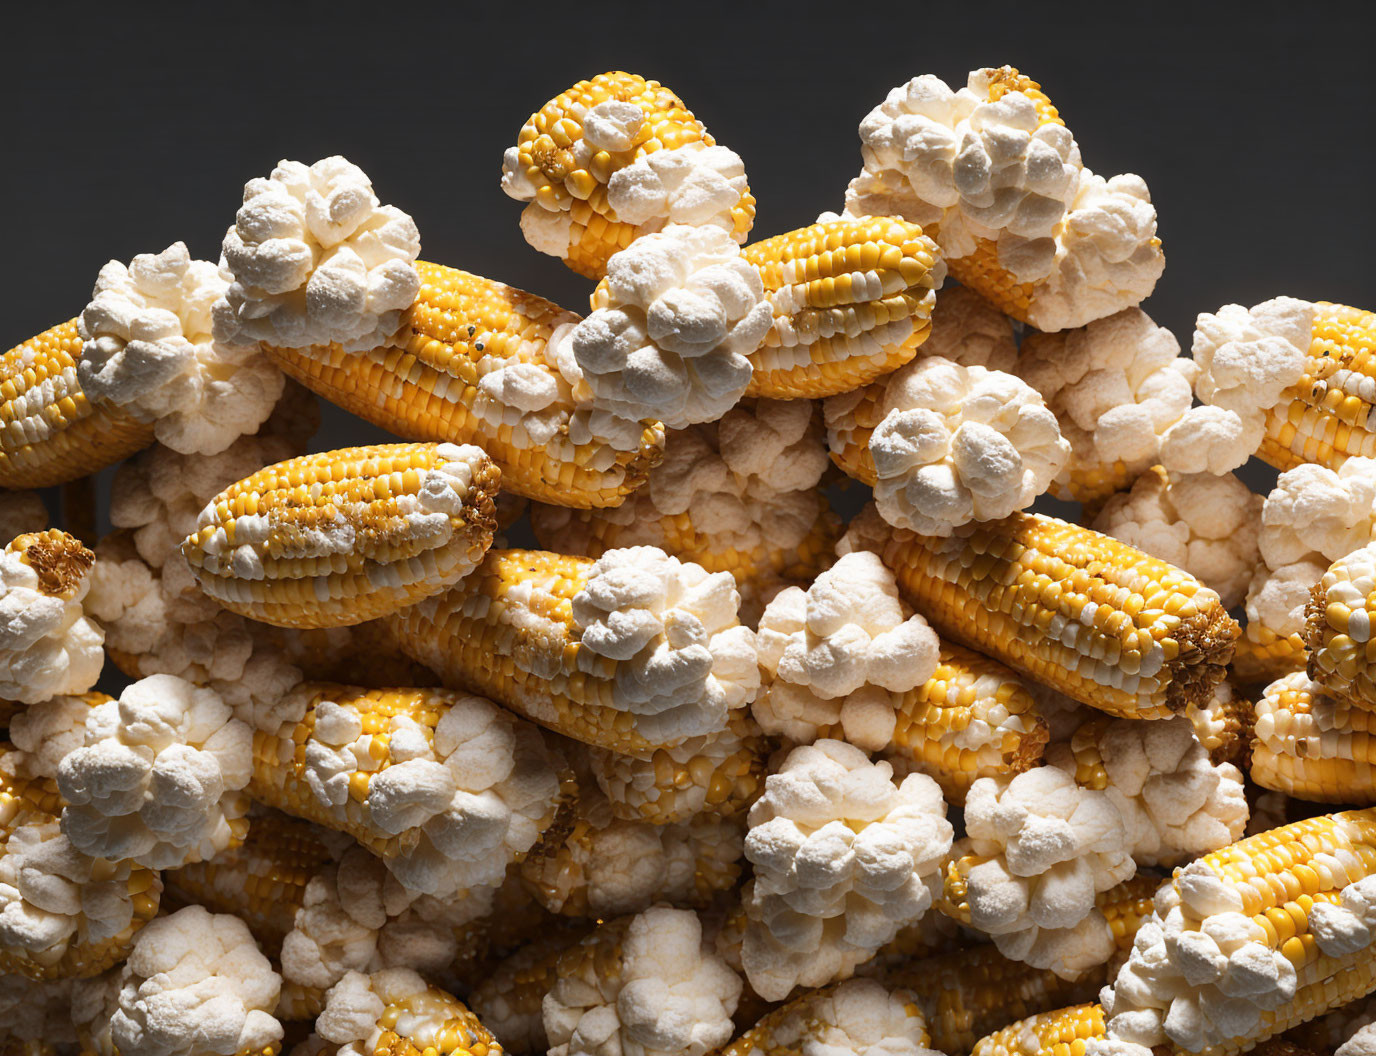 Partially Popped Corn Cobs on Dark Background